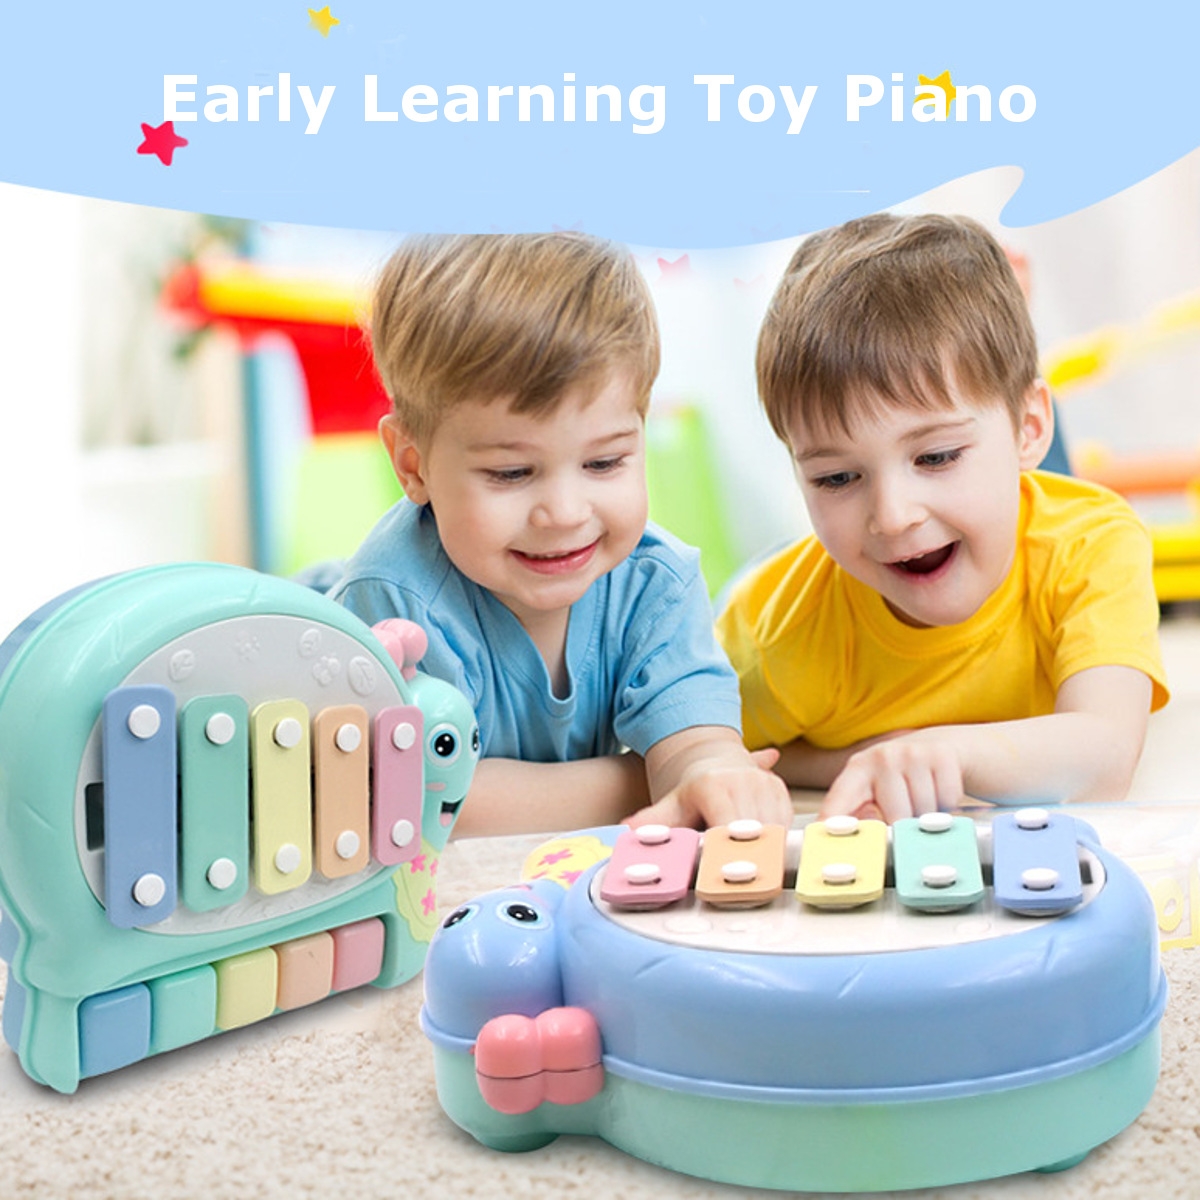 Hand Knocking Piano Orff Instruments Musical Toy Teaching Aid for Children Music Enlightenment